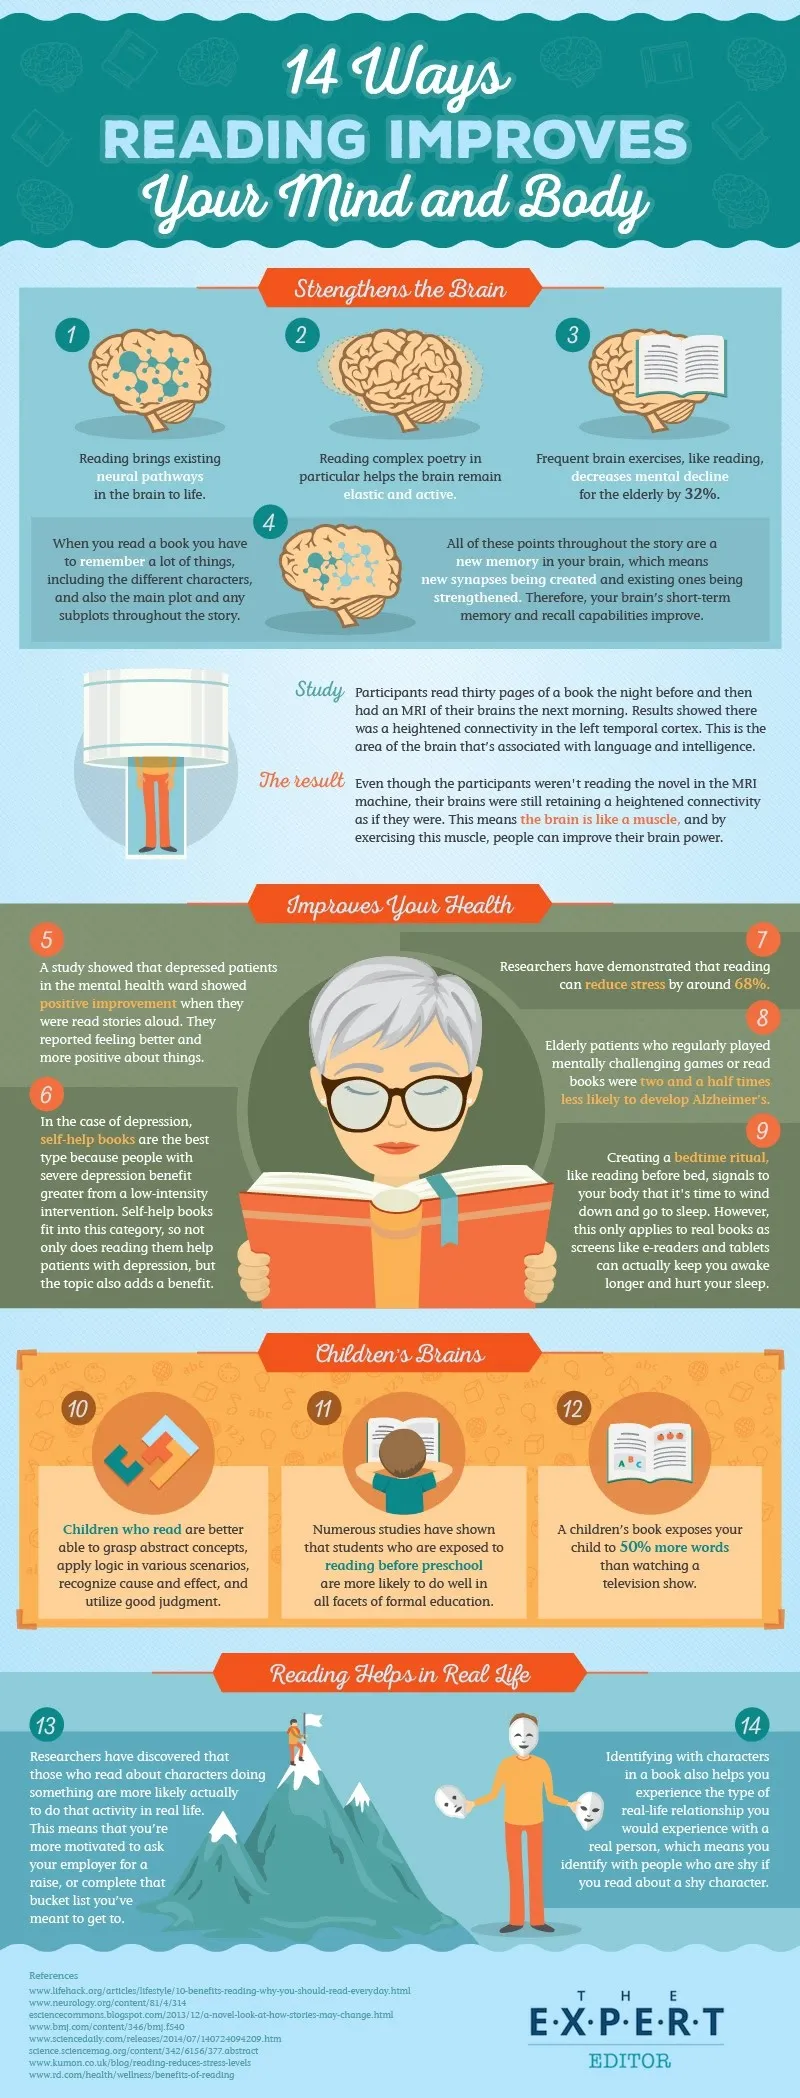 14 Ways Reading Improves Your Mind and Body - #Infographic